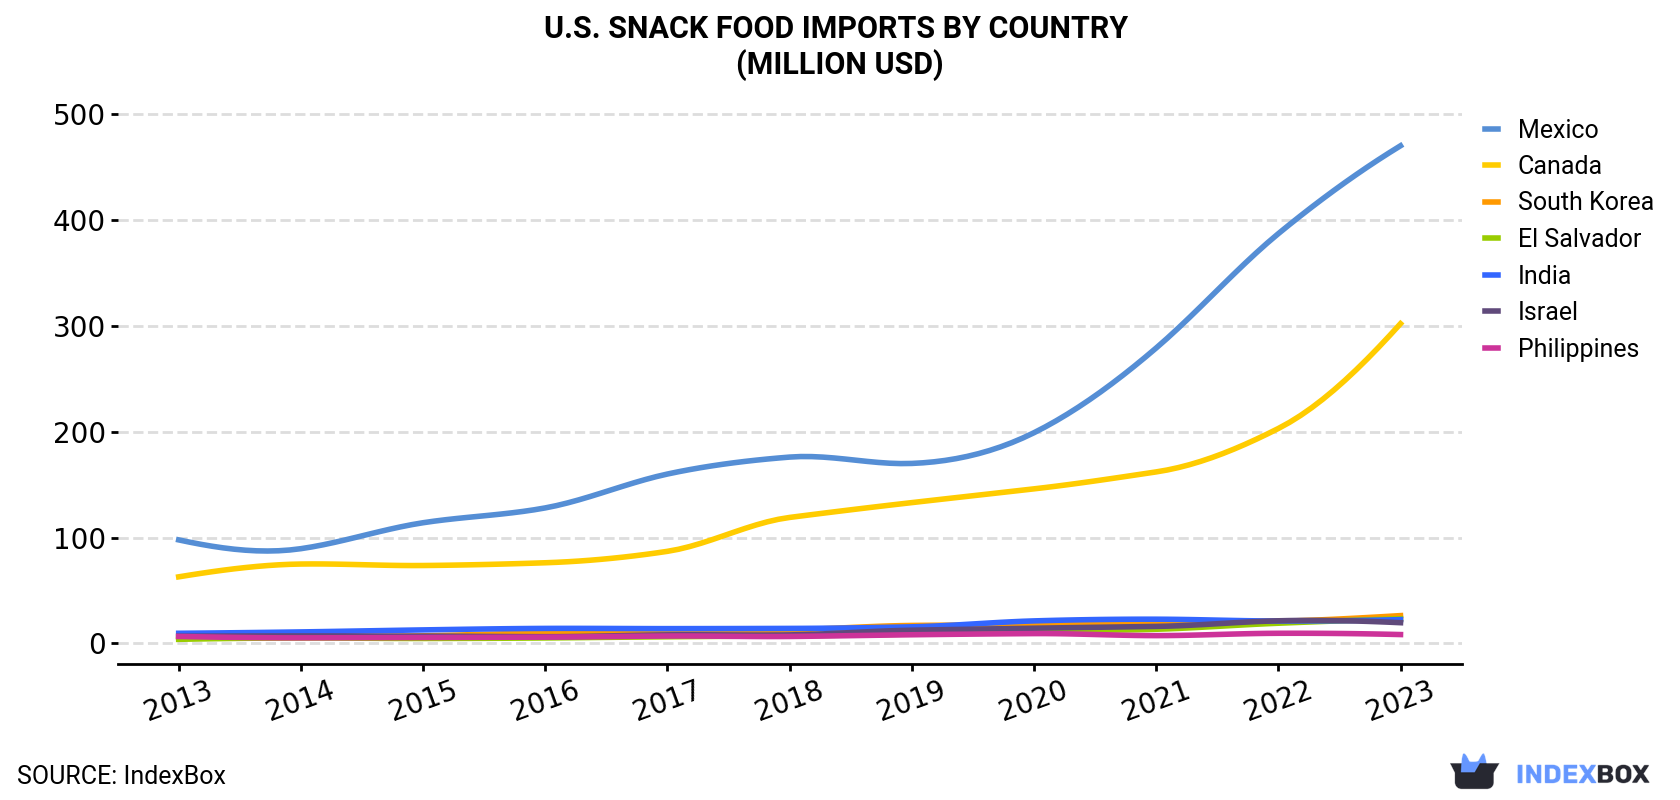 U.S. Snack Food Imports By Country (Million USD)